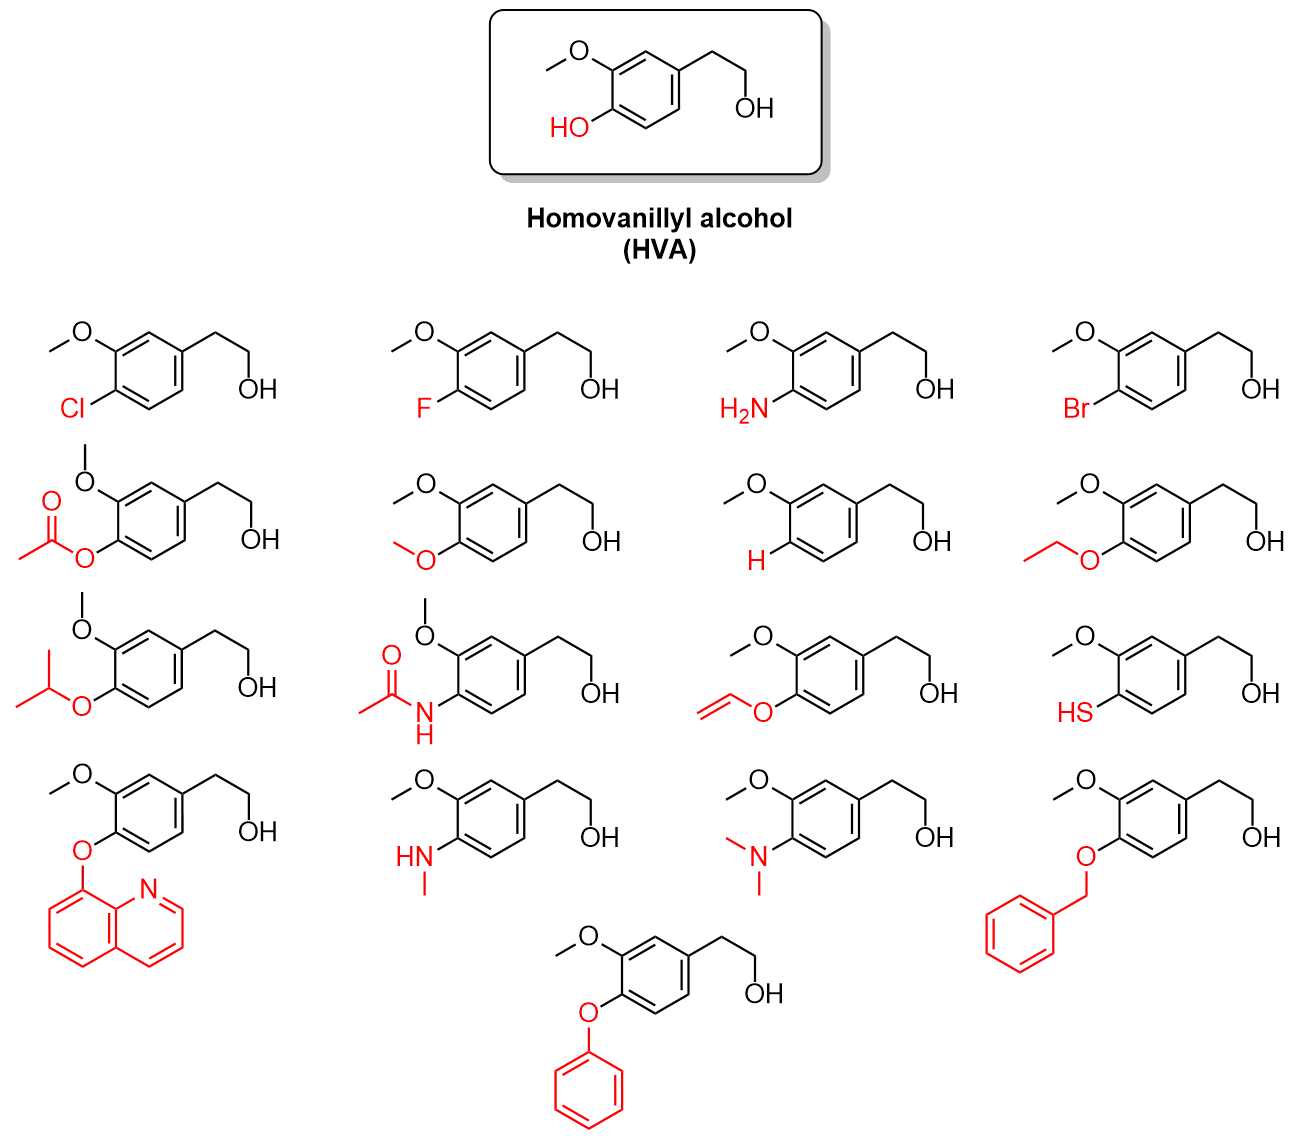 18 line-bond drawings of compounds similar or identical to homovanillyl alcohol. The structure of homovanillyl alcohol is shown at the top, as described in Figure 4.4.a, with the hydroxy group (OH) at the bottom left of the molecule highlighted in red. The other 17 line-bond drawings show variations of this structure, in which the red hydroxy group is replaced by a variety of possible functional groups such as halogens, amines, amides, esters, ethers, and thiols.